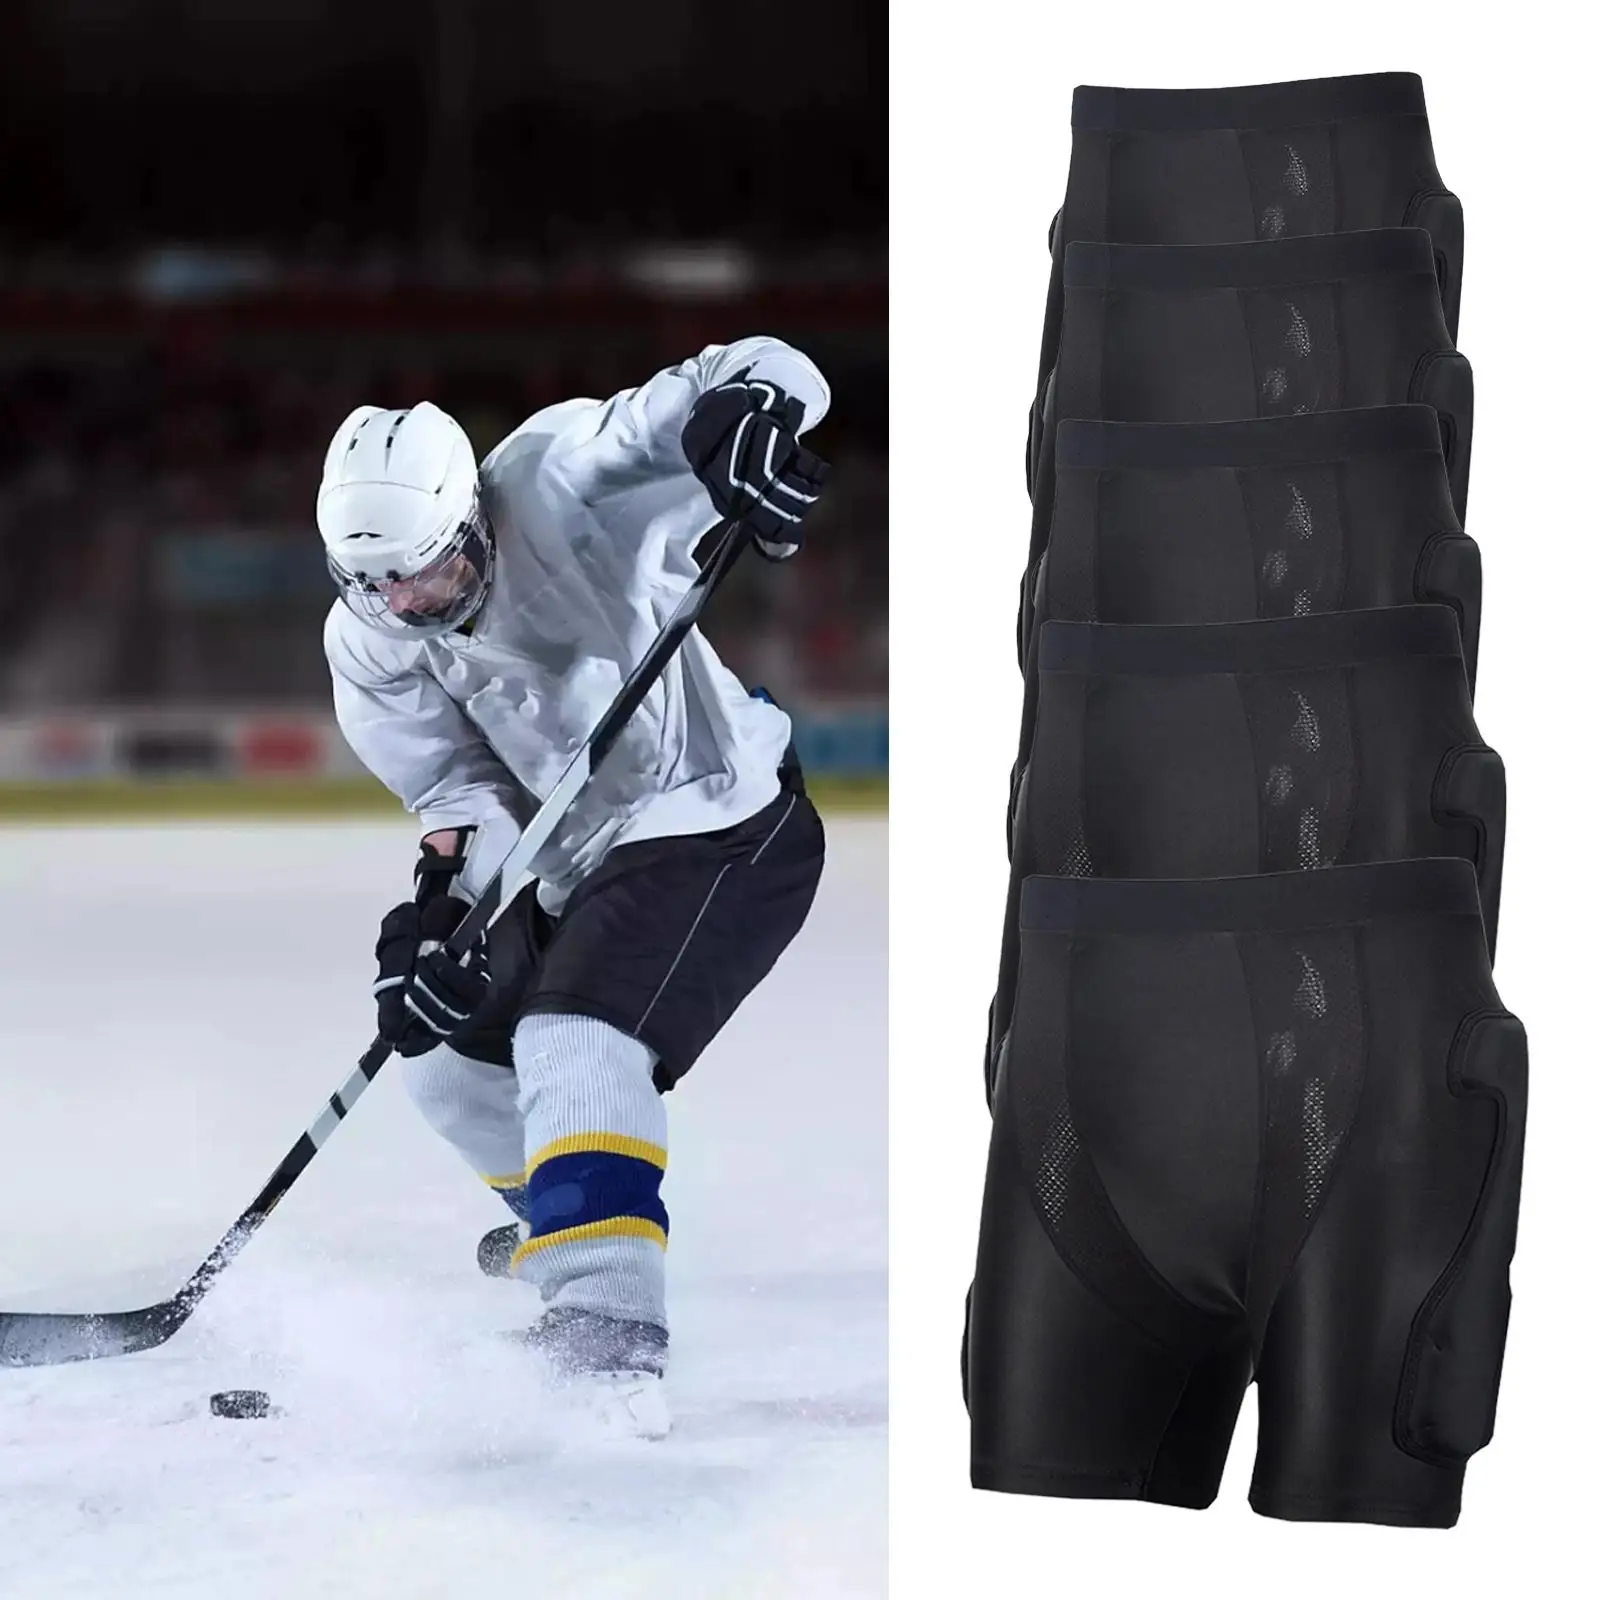 Padded Shorts Skid Hip Pad Multifunction 3D Impact Pad Pants for Riding Outdoor Sports Snowboarding Roller Skating Adults Teens